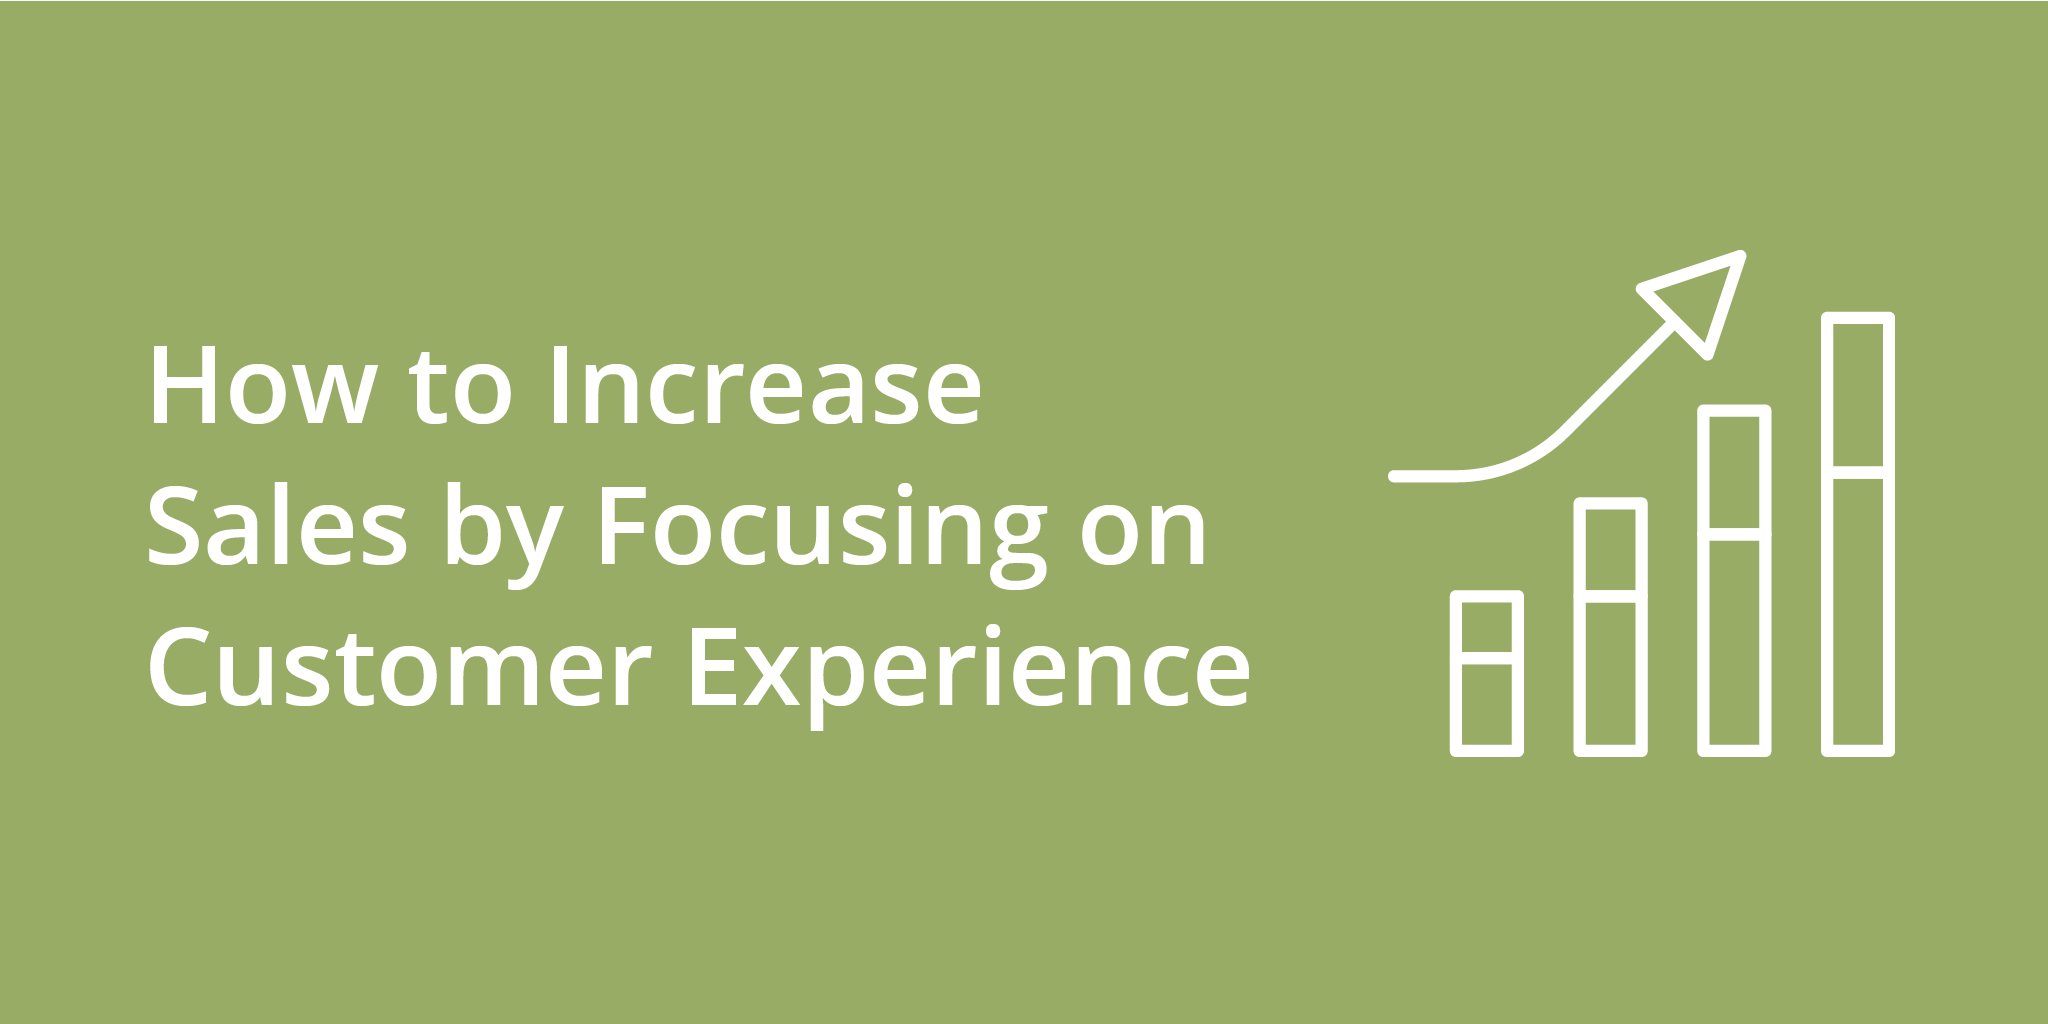 How to Increase Sales by Focusing on Customer Experience | Telephones for business